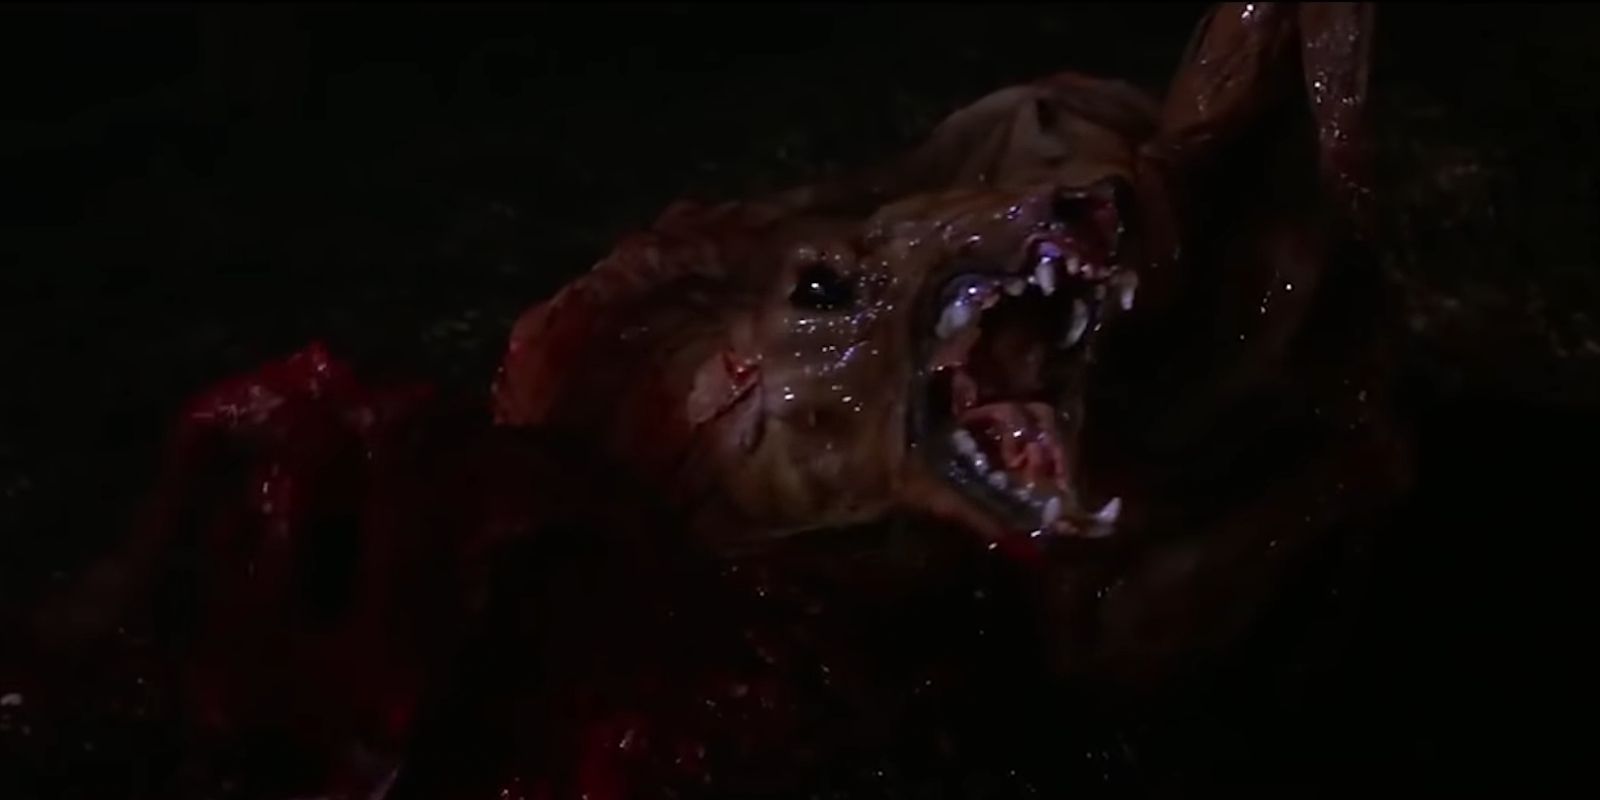 The Thing mutating into a dog monster in John Carpenters The Thing